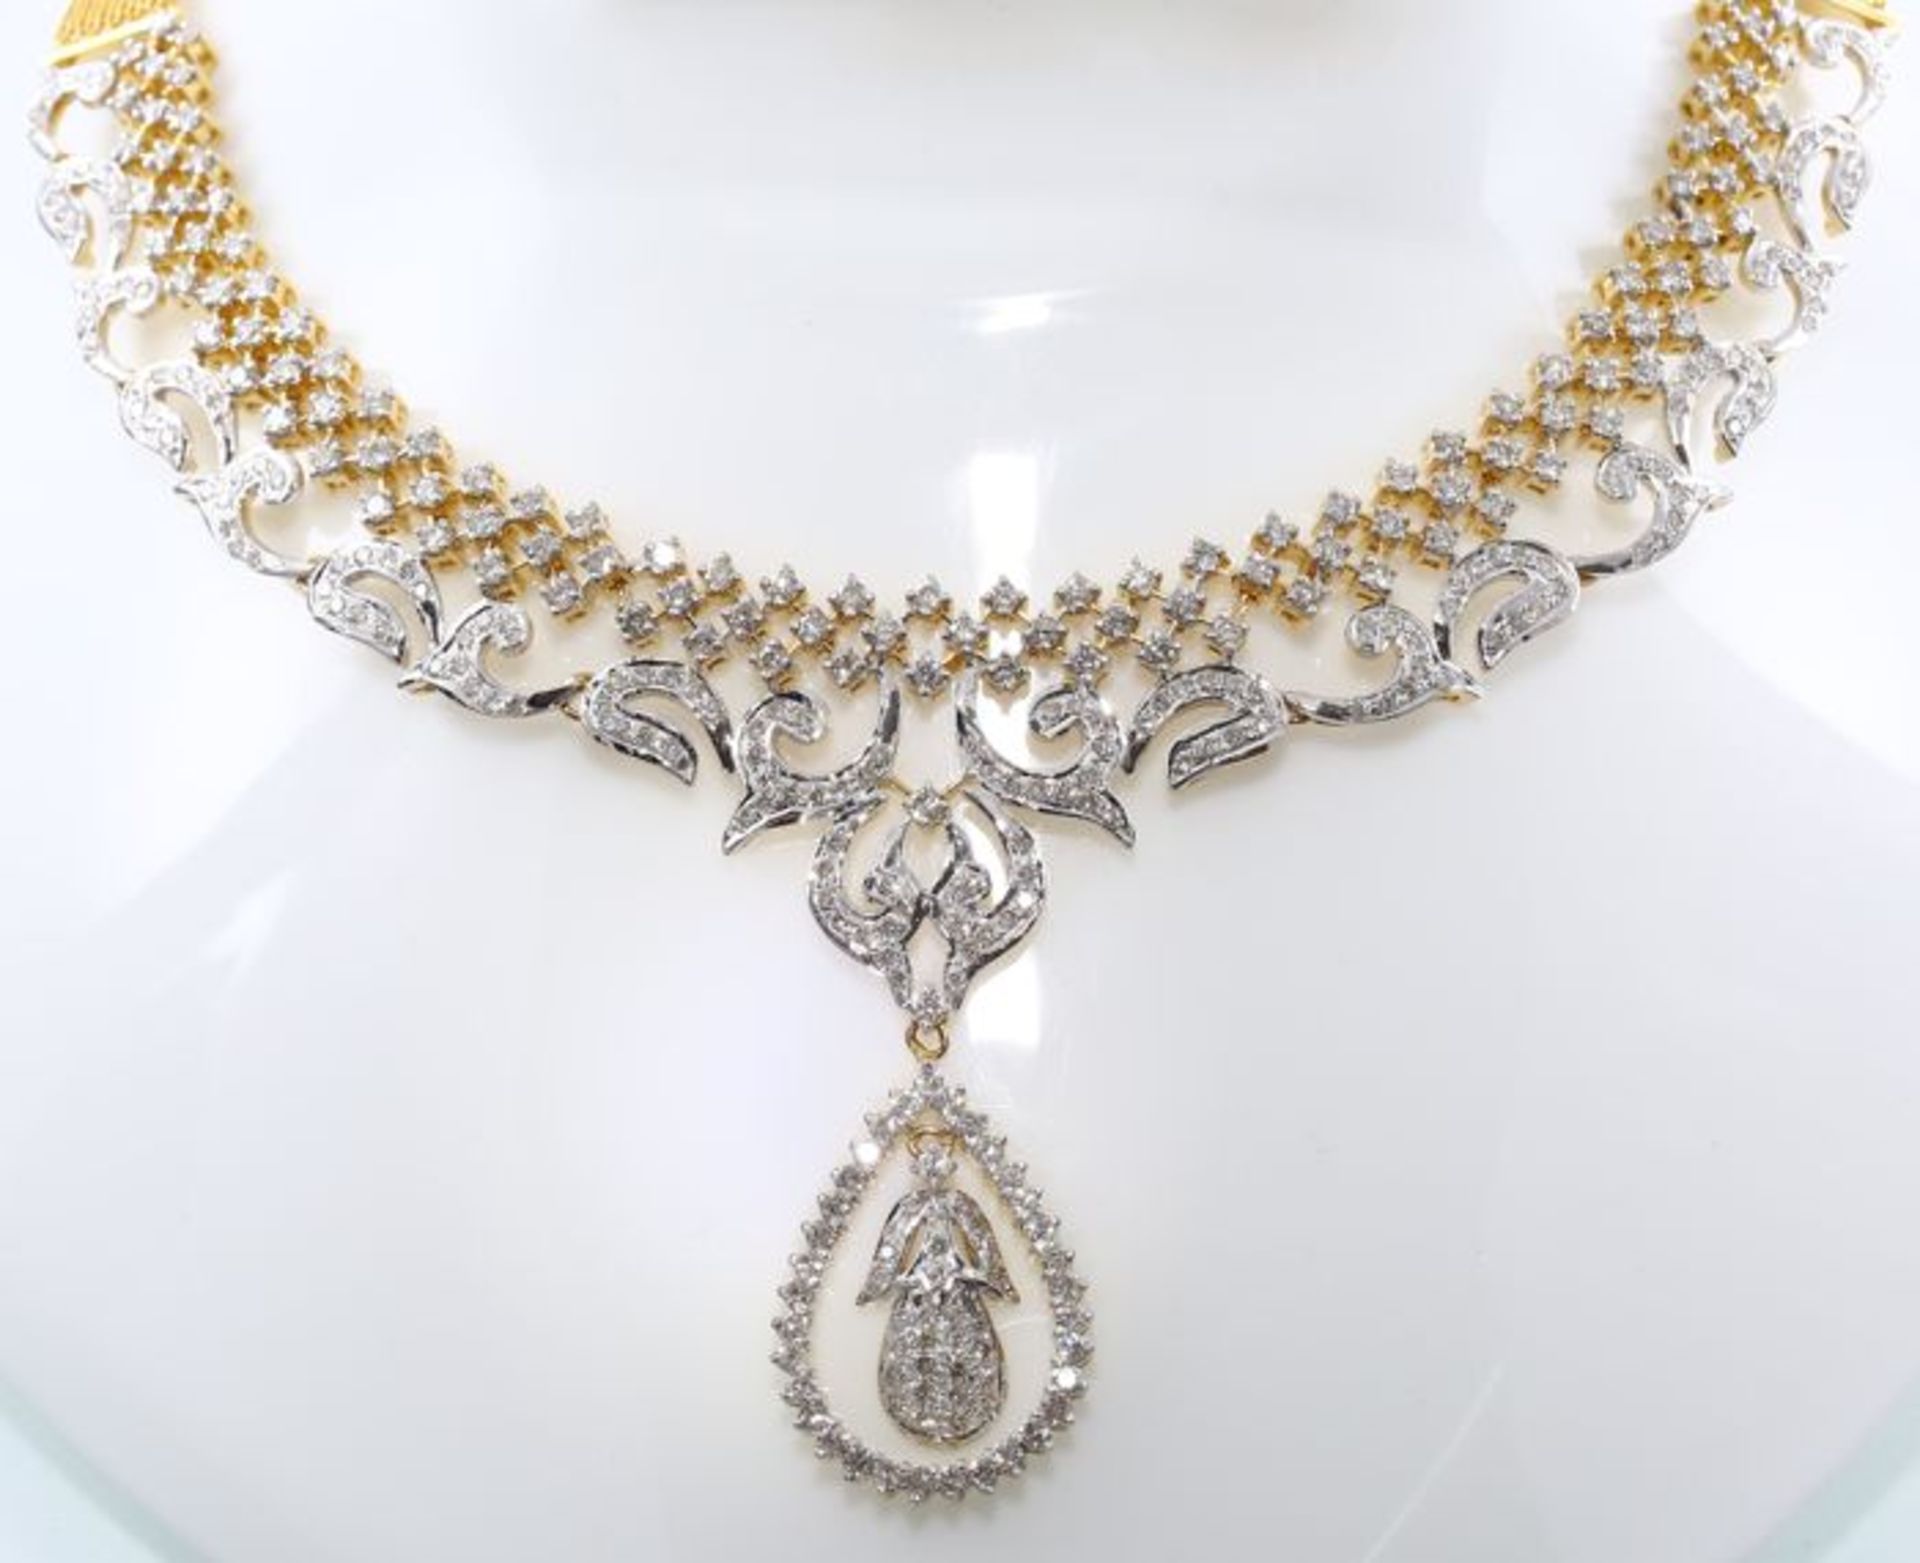 IGI Certified Large Yellow Gold Diamond Necklace with Chandelier Earrings - Image 7 of 9